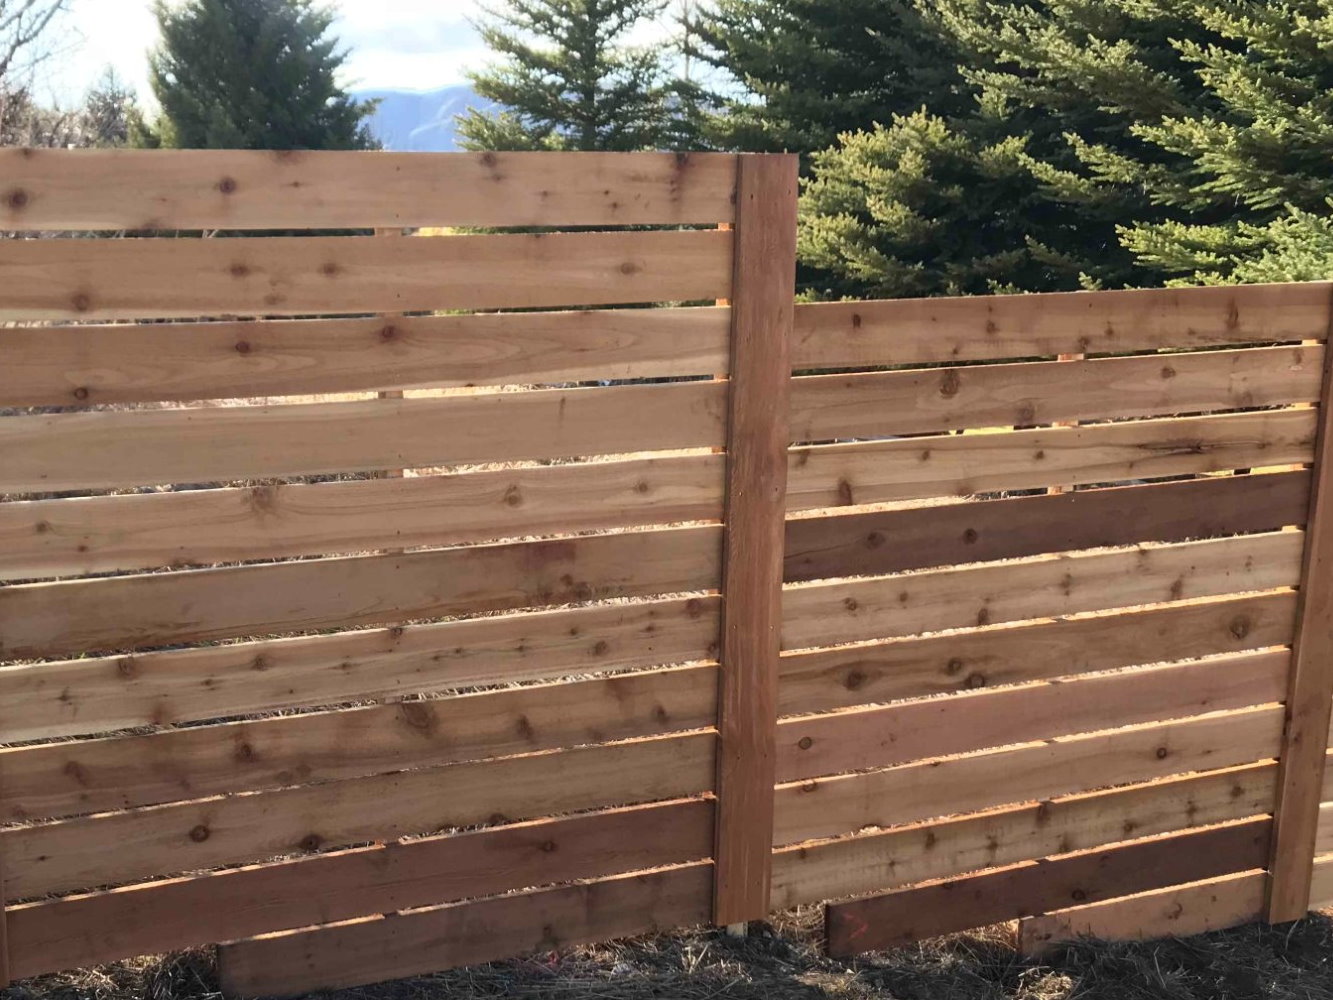 South Greeley WY horizontal style wood fence